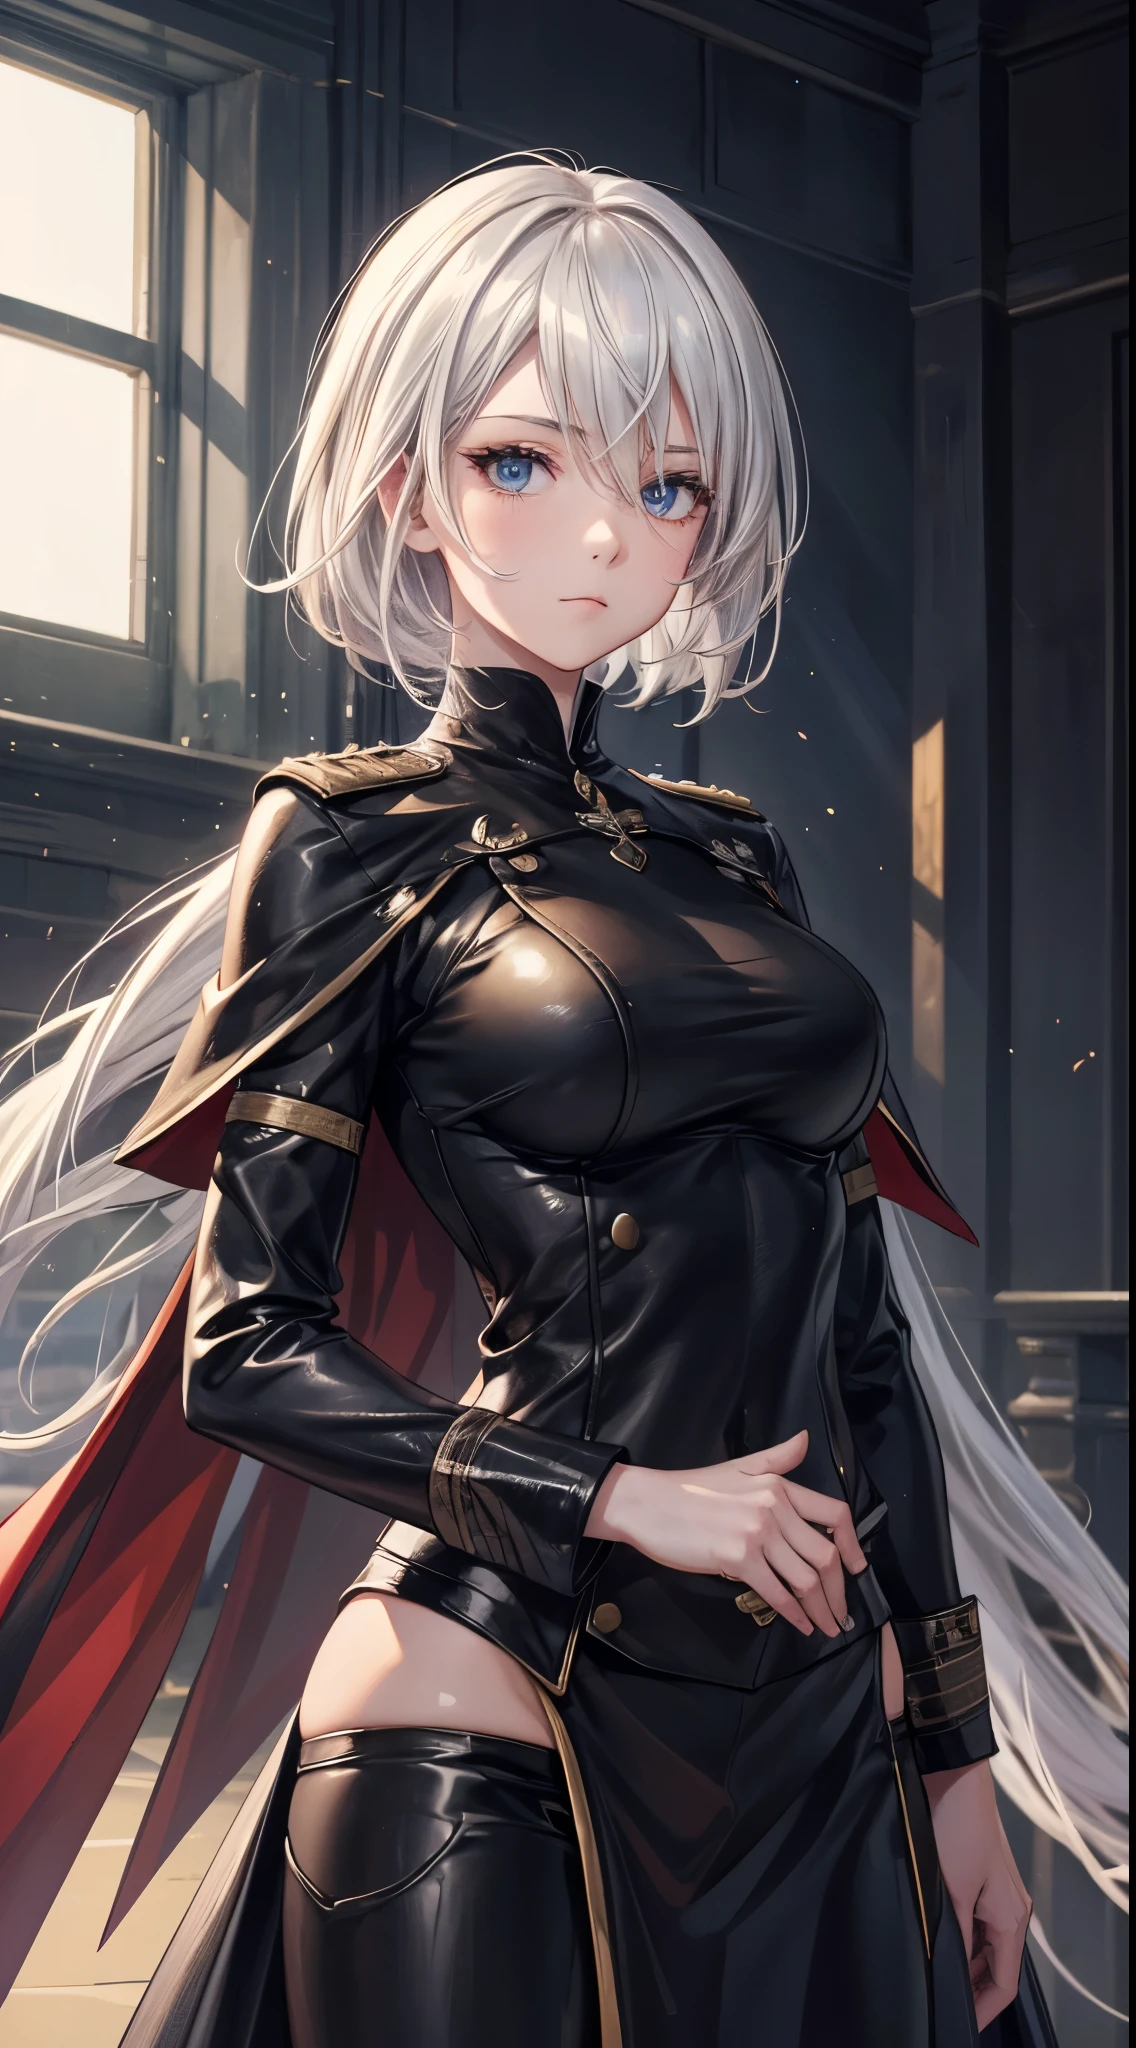 (extremely detailed CG unity 8k wallpaper), (masterpiece), (best quality), (ultra-detailed), (best illustration), (best shadow), (absurdres), 2b, 1girl, short hair, short ponytail, normal size , white hair, blindfold solo, Intimidating women, admiral uniform, night, hero pose, white clothes, General Uniform, Military Uniform, Sunlight, exposed to sunlight,commander, cape, fighting, ((beautiful fantasy girl)), (Master Part: 1.2), Best Quality, High Resolution, photorealestic, photogenic, Unity 8k Wallpaper, perfect lighting, (perfect arms, perfect anatomy) beatiful face, intricate details, lifelike details, the anime, The Perfect Girl, perfect details, ultra HD |, 8k, Professional photo